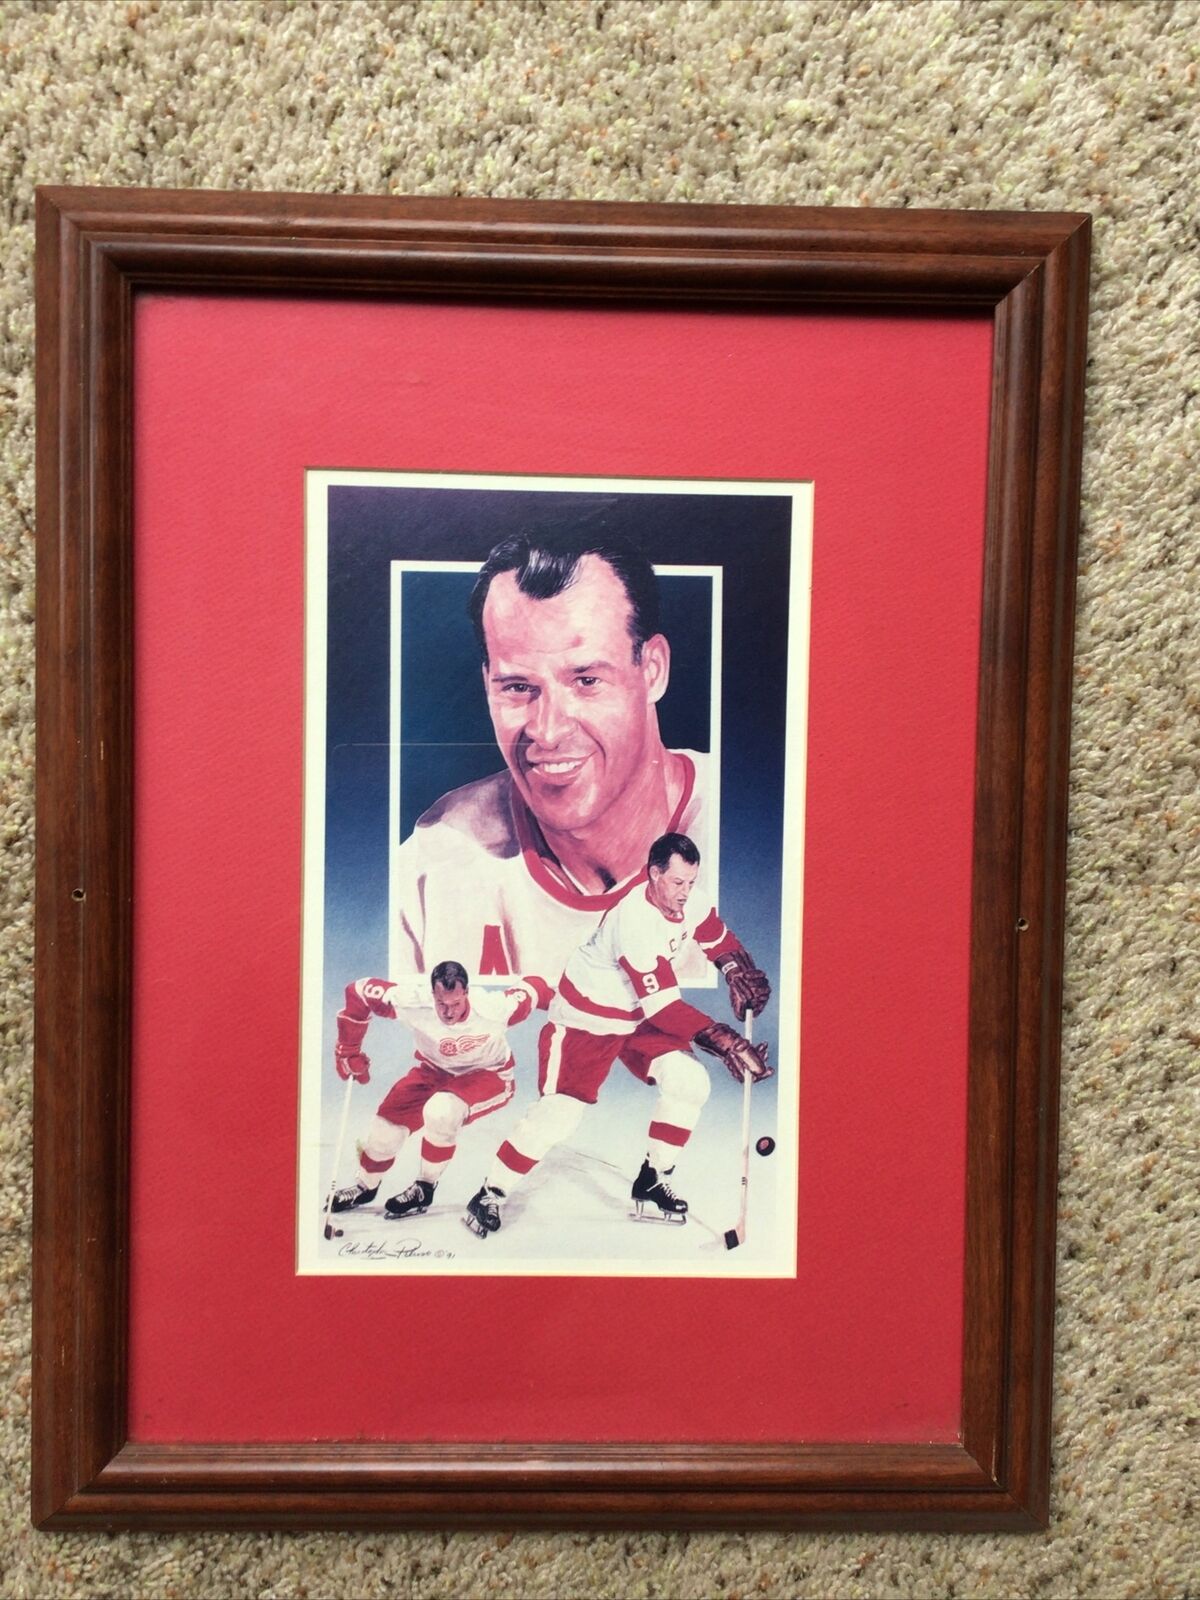 GORDIE HOWE FRAMED LIMITED EDITION LITHOGRAPH CHRISTOPHER PALUSO